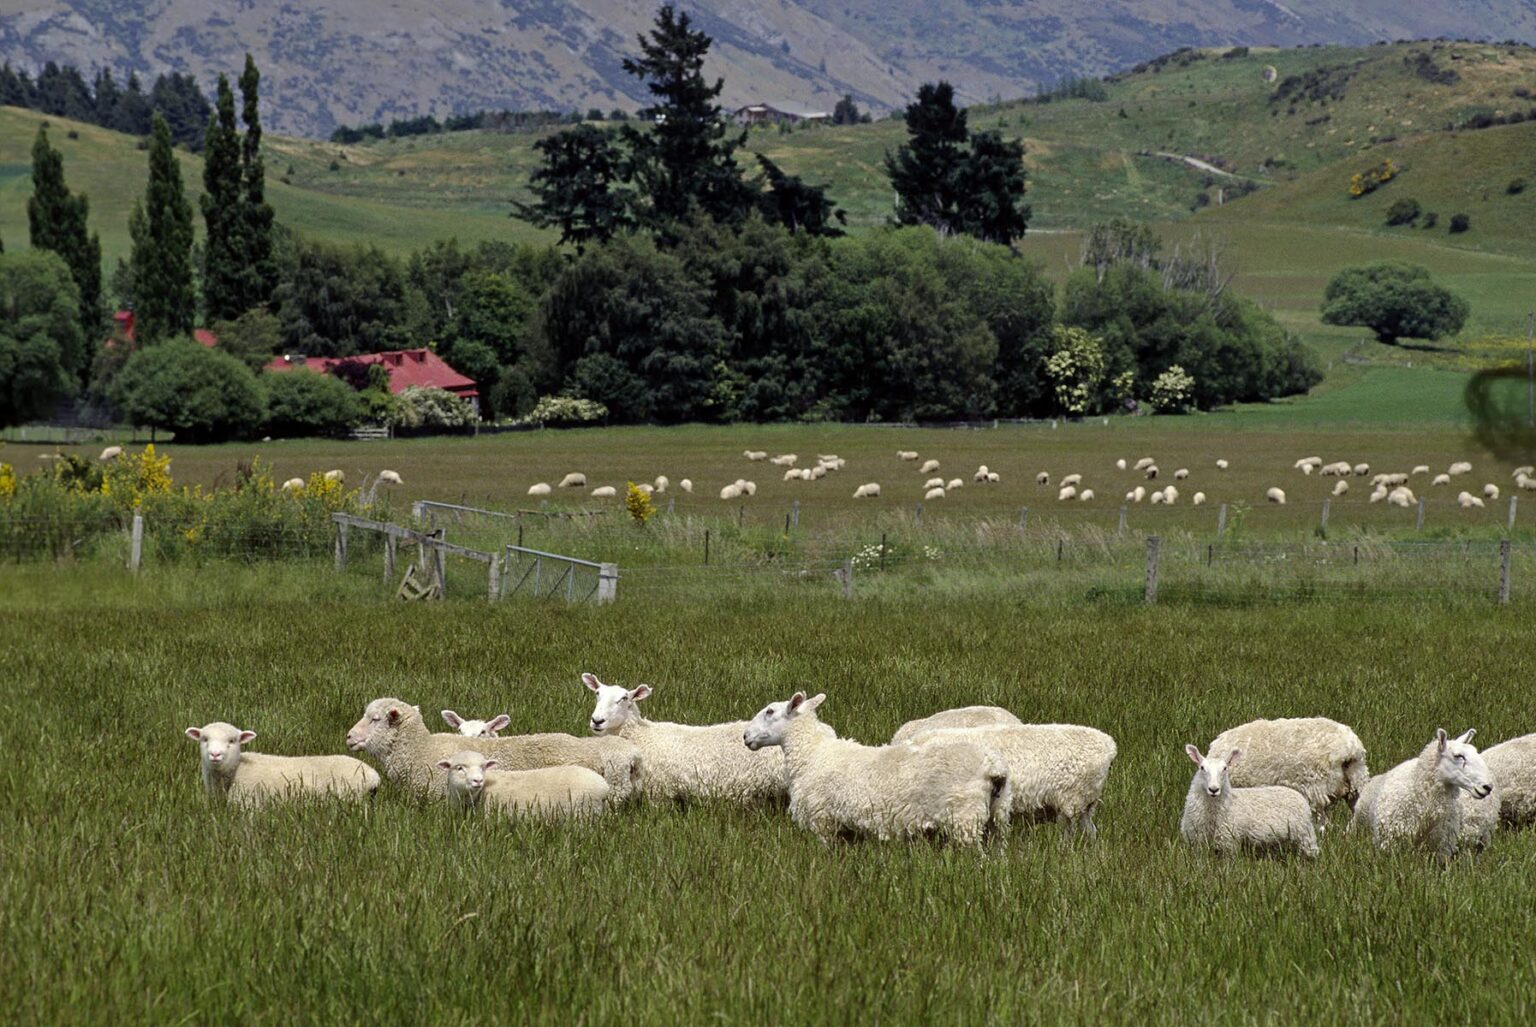 A flock of SHEEP graze on the lush pasture found near Queenstown; (New Zealand has 70 million sheep) - SOUTH ISLAND, NEW ZEALAND